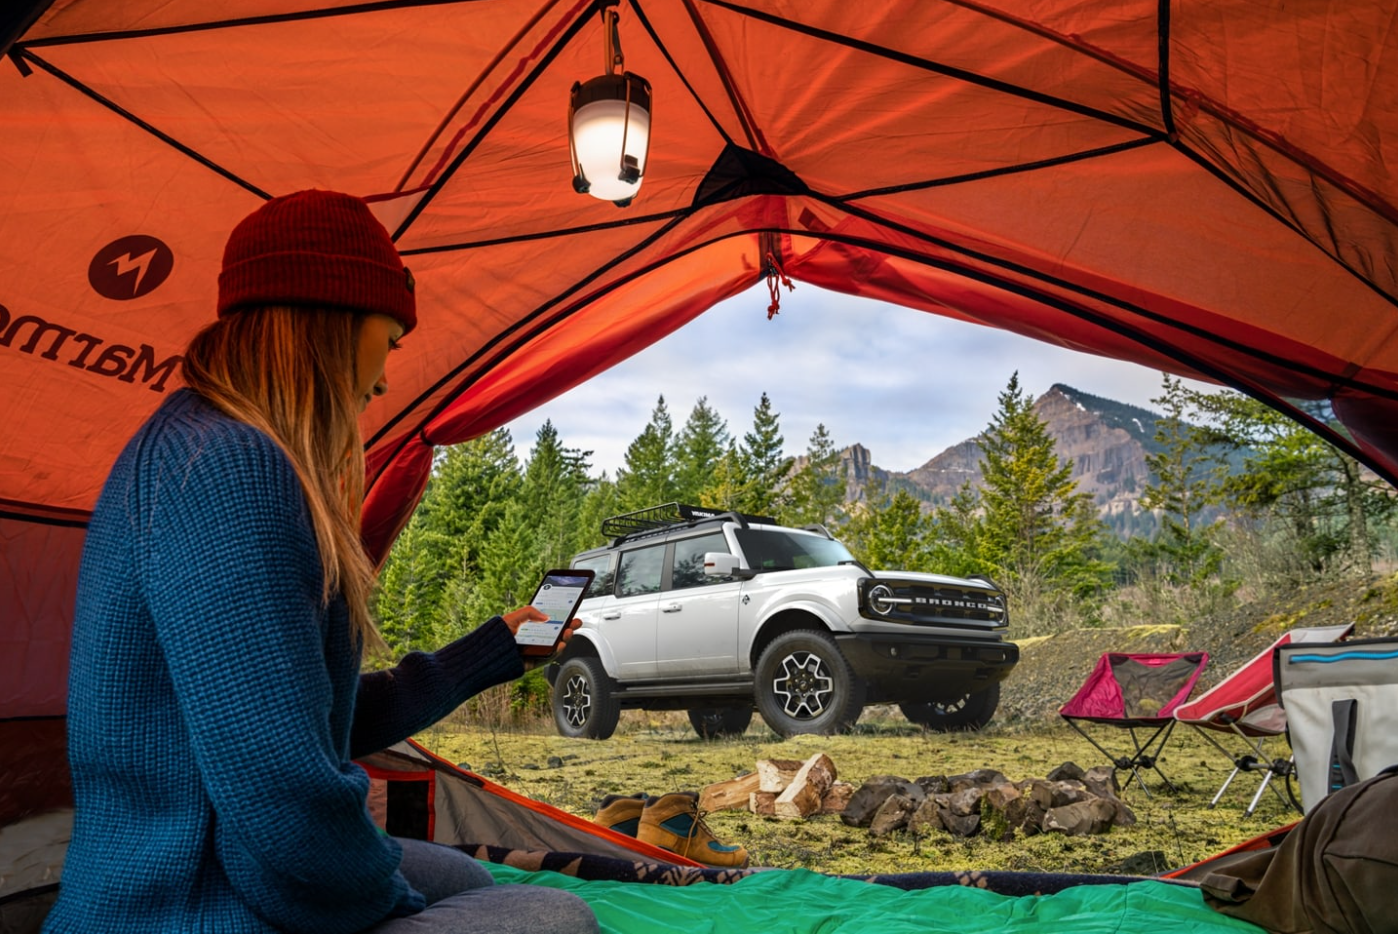 A view of a silver 2023 Ford Bronco parked at a campsite through the door of an orange tent.